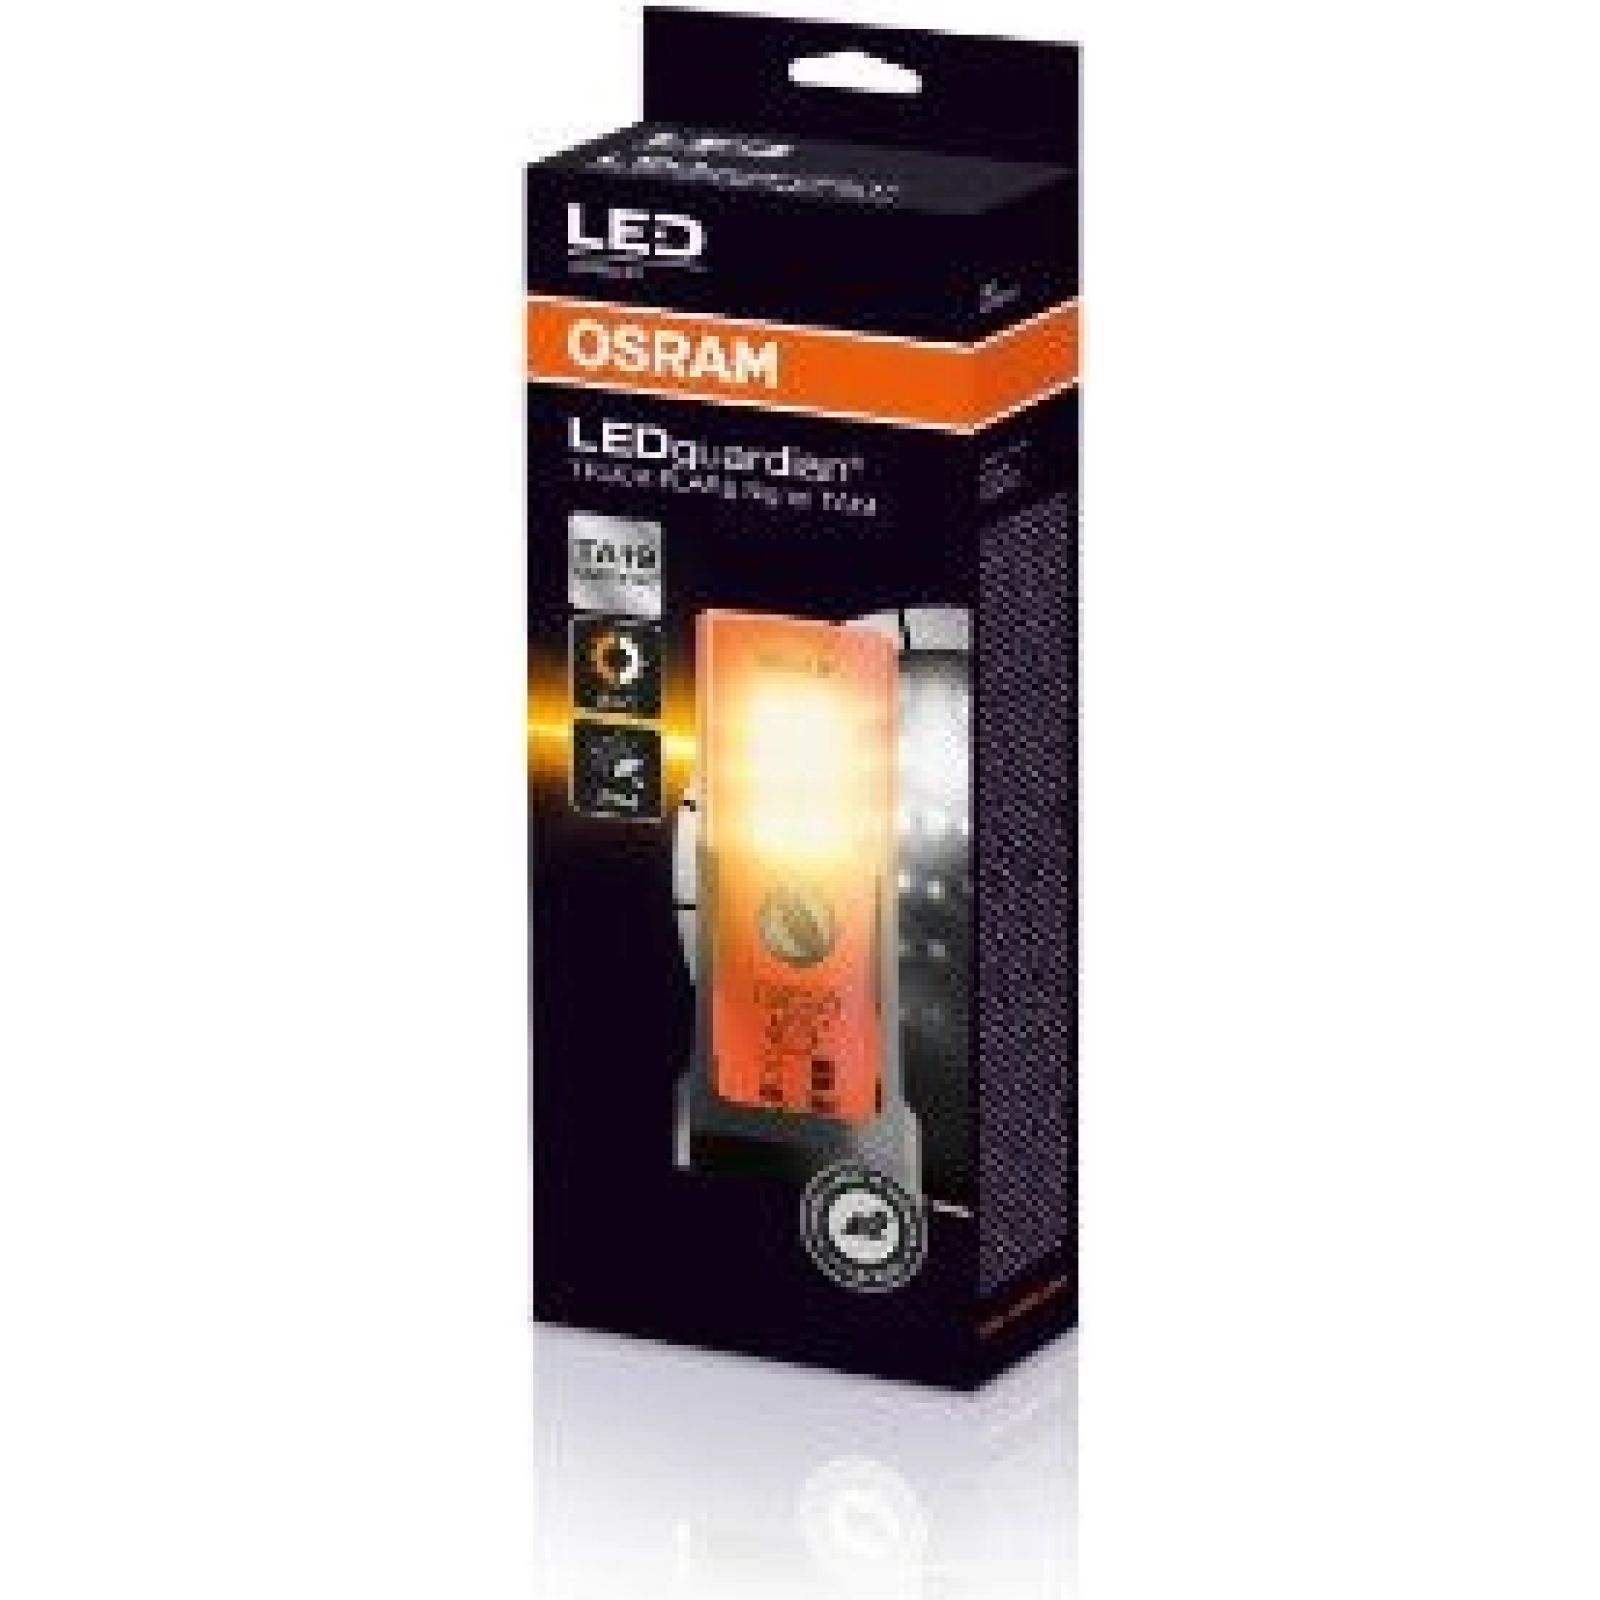 https://www.autoteile-store.at/img/product/ledguardian-truck-flare-signal-osram-led-handleuchte-ledguardian-r-truck-flare-signal-ledsl103-200387/2edd103bad2b670d66636c9f0f865246_1600.jpg